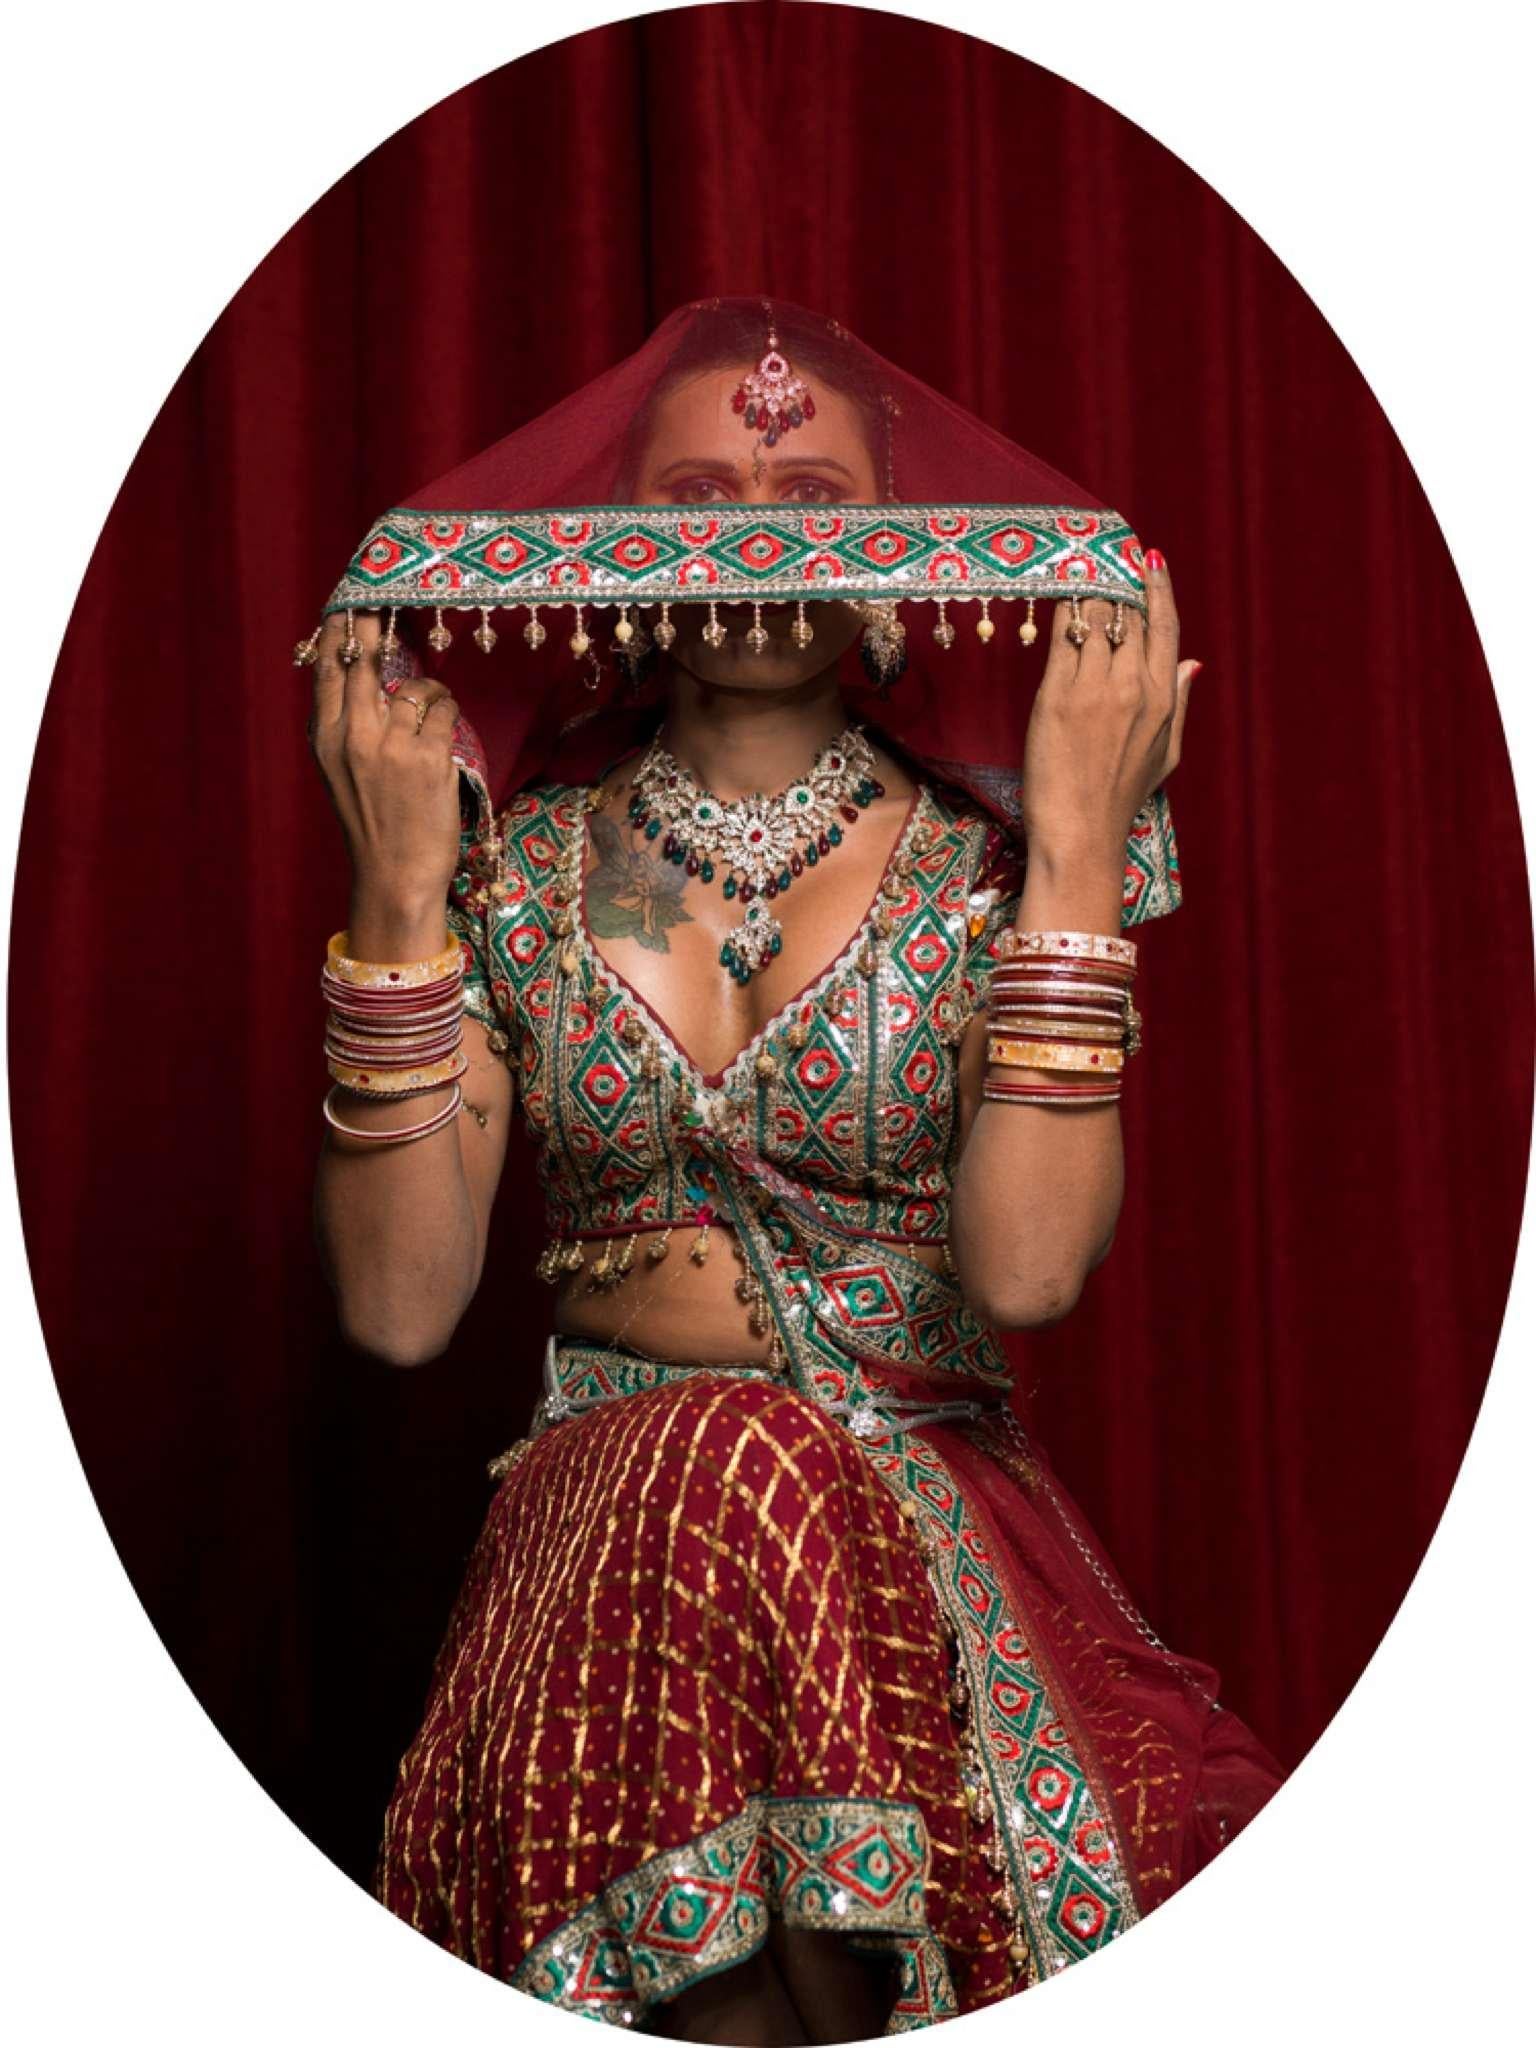 Harsha and Sneha, Protraits. From The Third Gender of India Series  - Photograph by Jill Peters